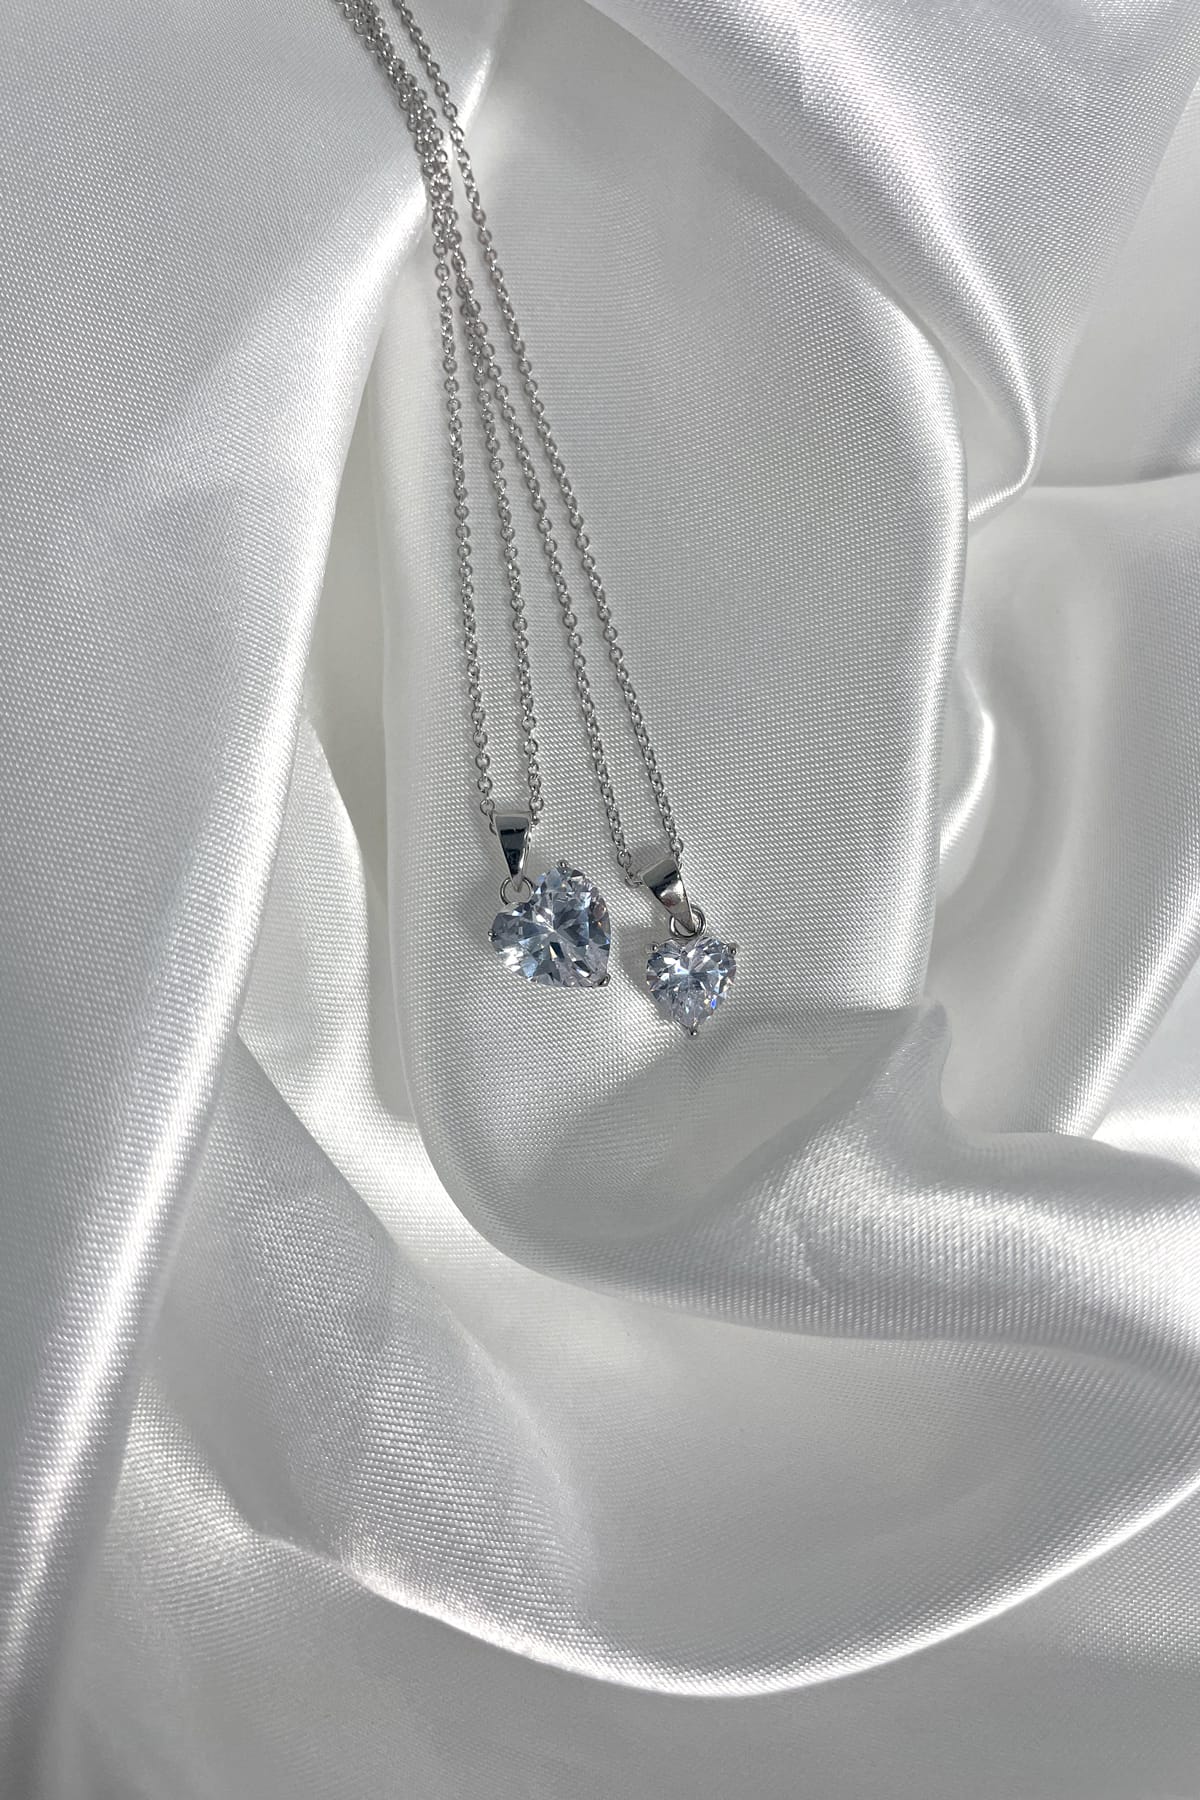 Sterling Silver 7mm Heart Cubic Zirconia Pendant with Chain available at LeGassick Diamonds and Jewellery Gold Coast, Australia.